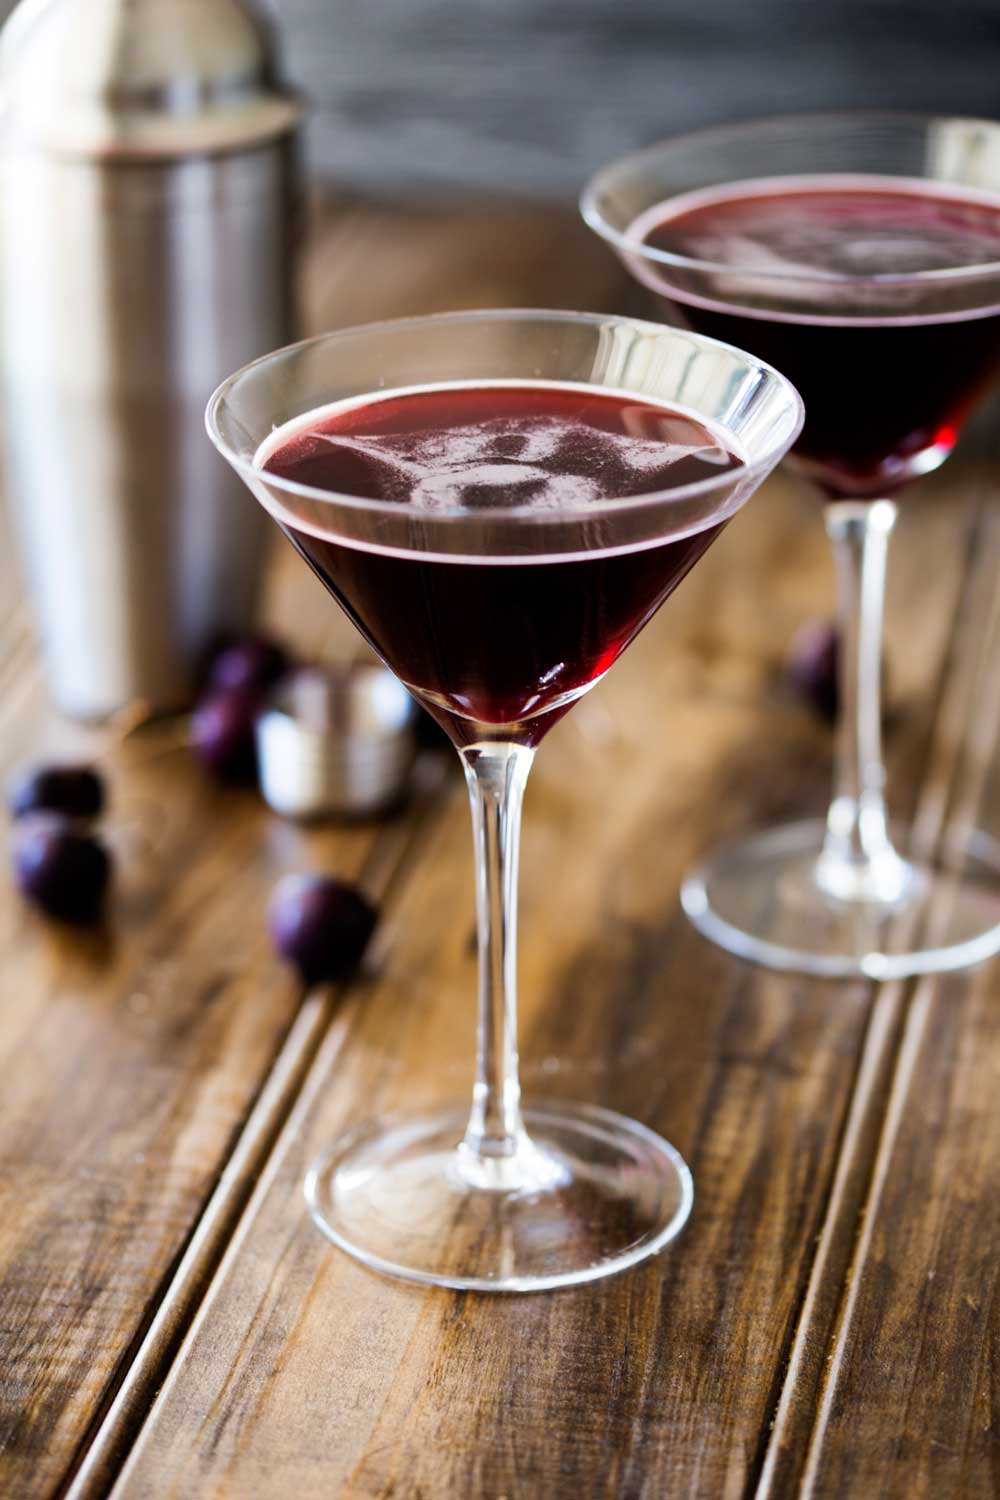 This cherrytini is the perfect fruity martini! It tastes like an adult version of cherry drop sweets. Packed with cherry flavour and pulling a great alcoholic punch.